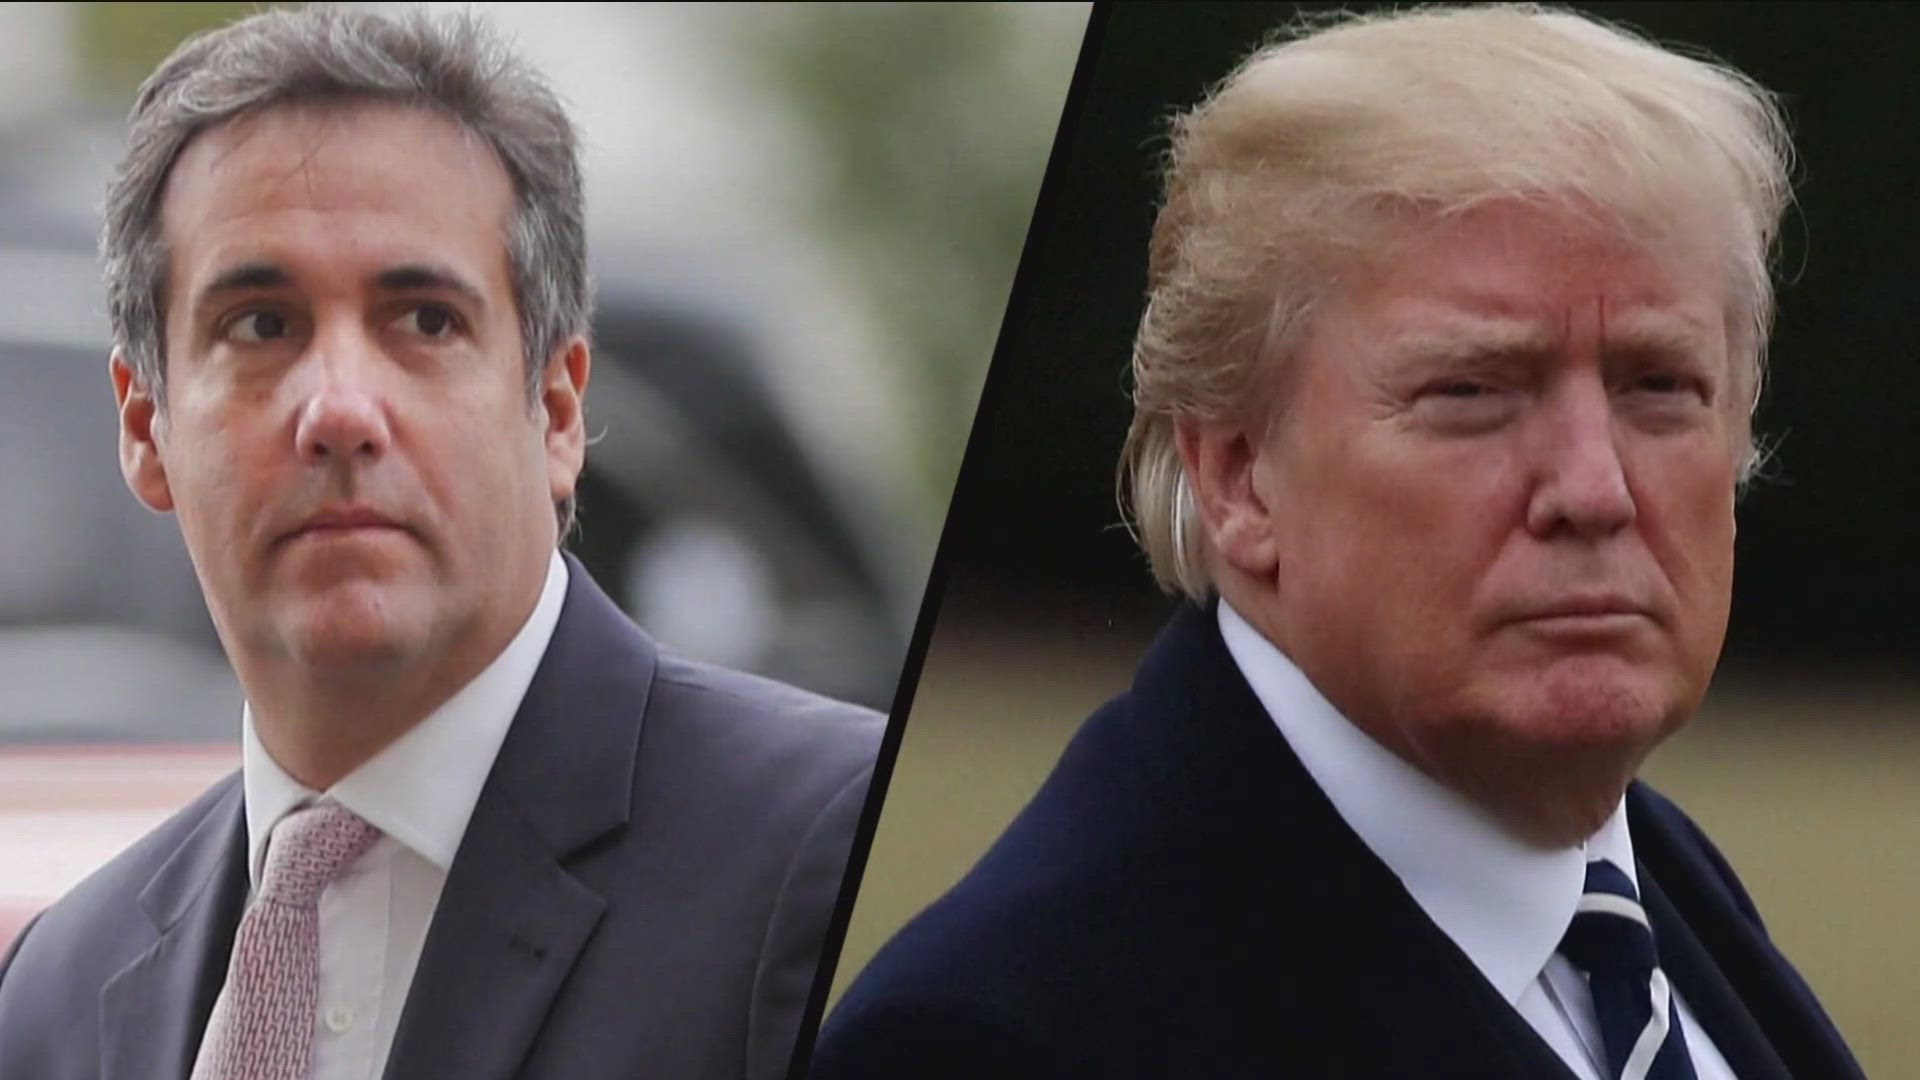 Cohen will be the prosecution's last witness. Trump's defense will begin after his time is up on the witness stand.